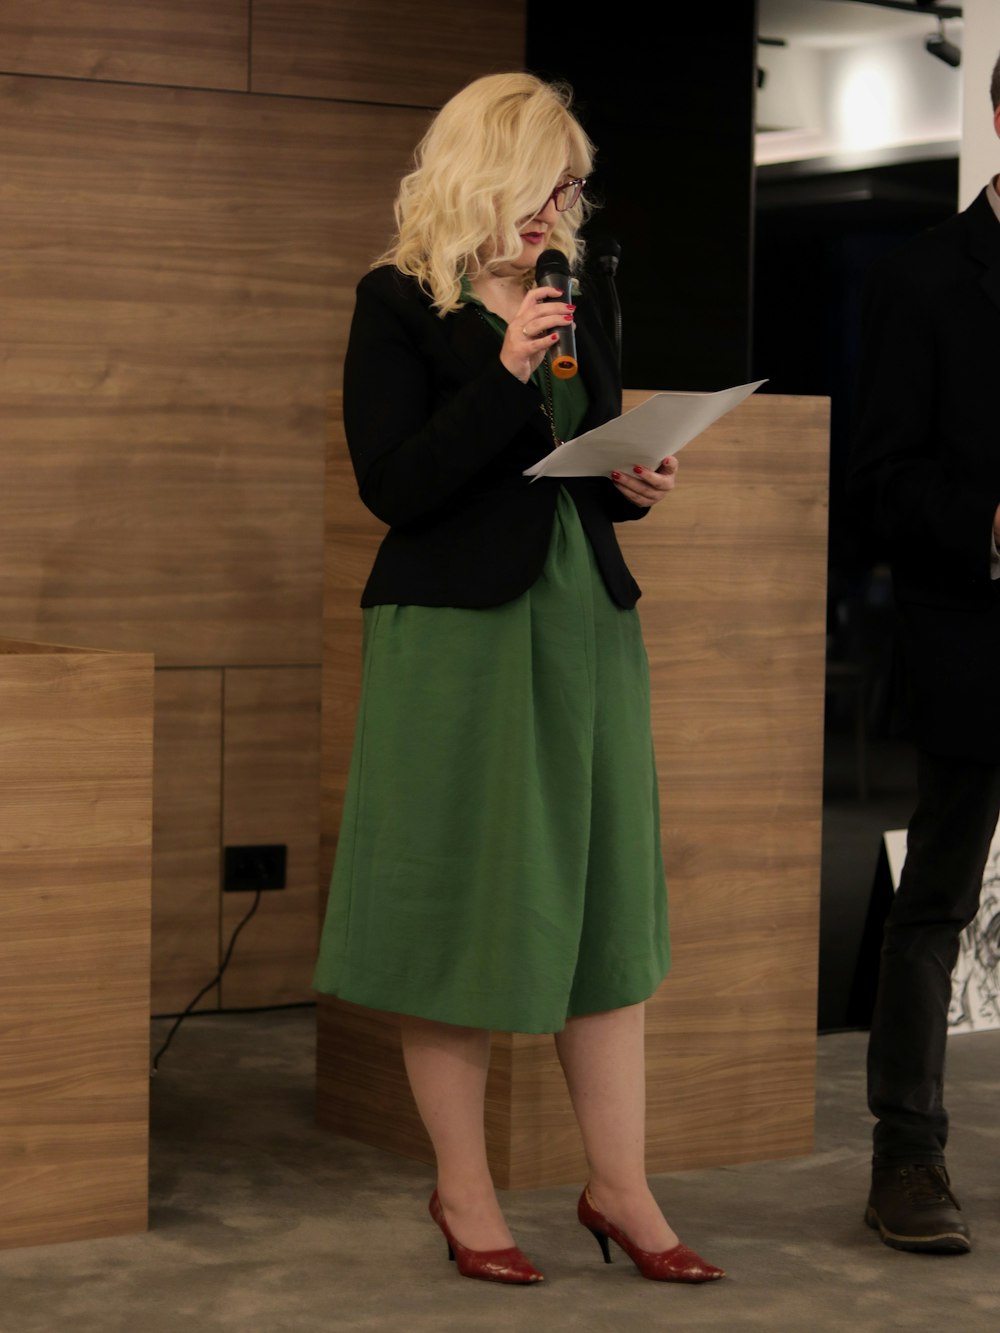 a woman in a green dress holding a microphone